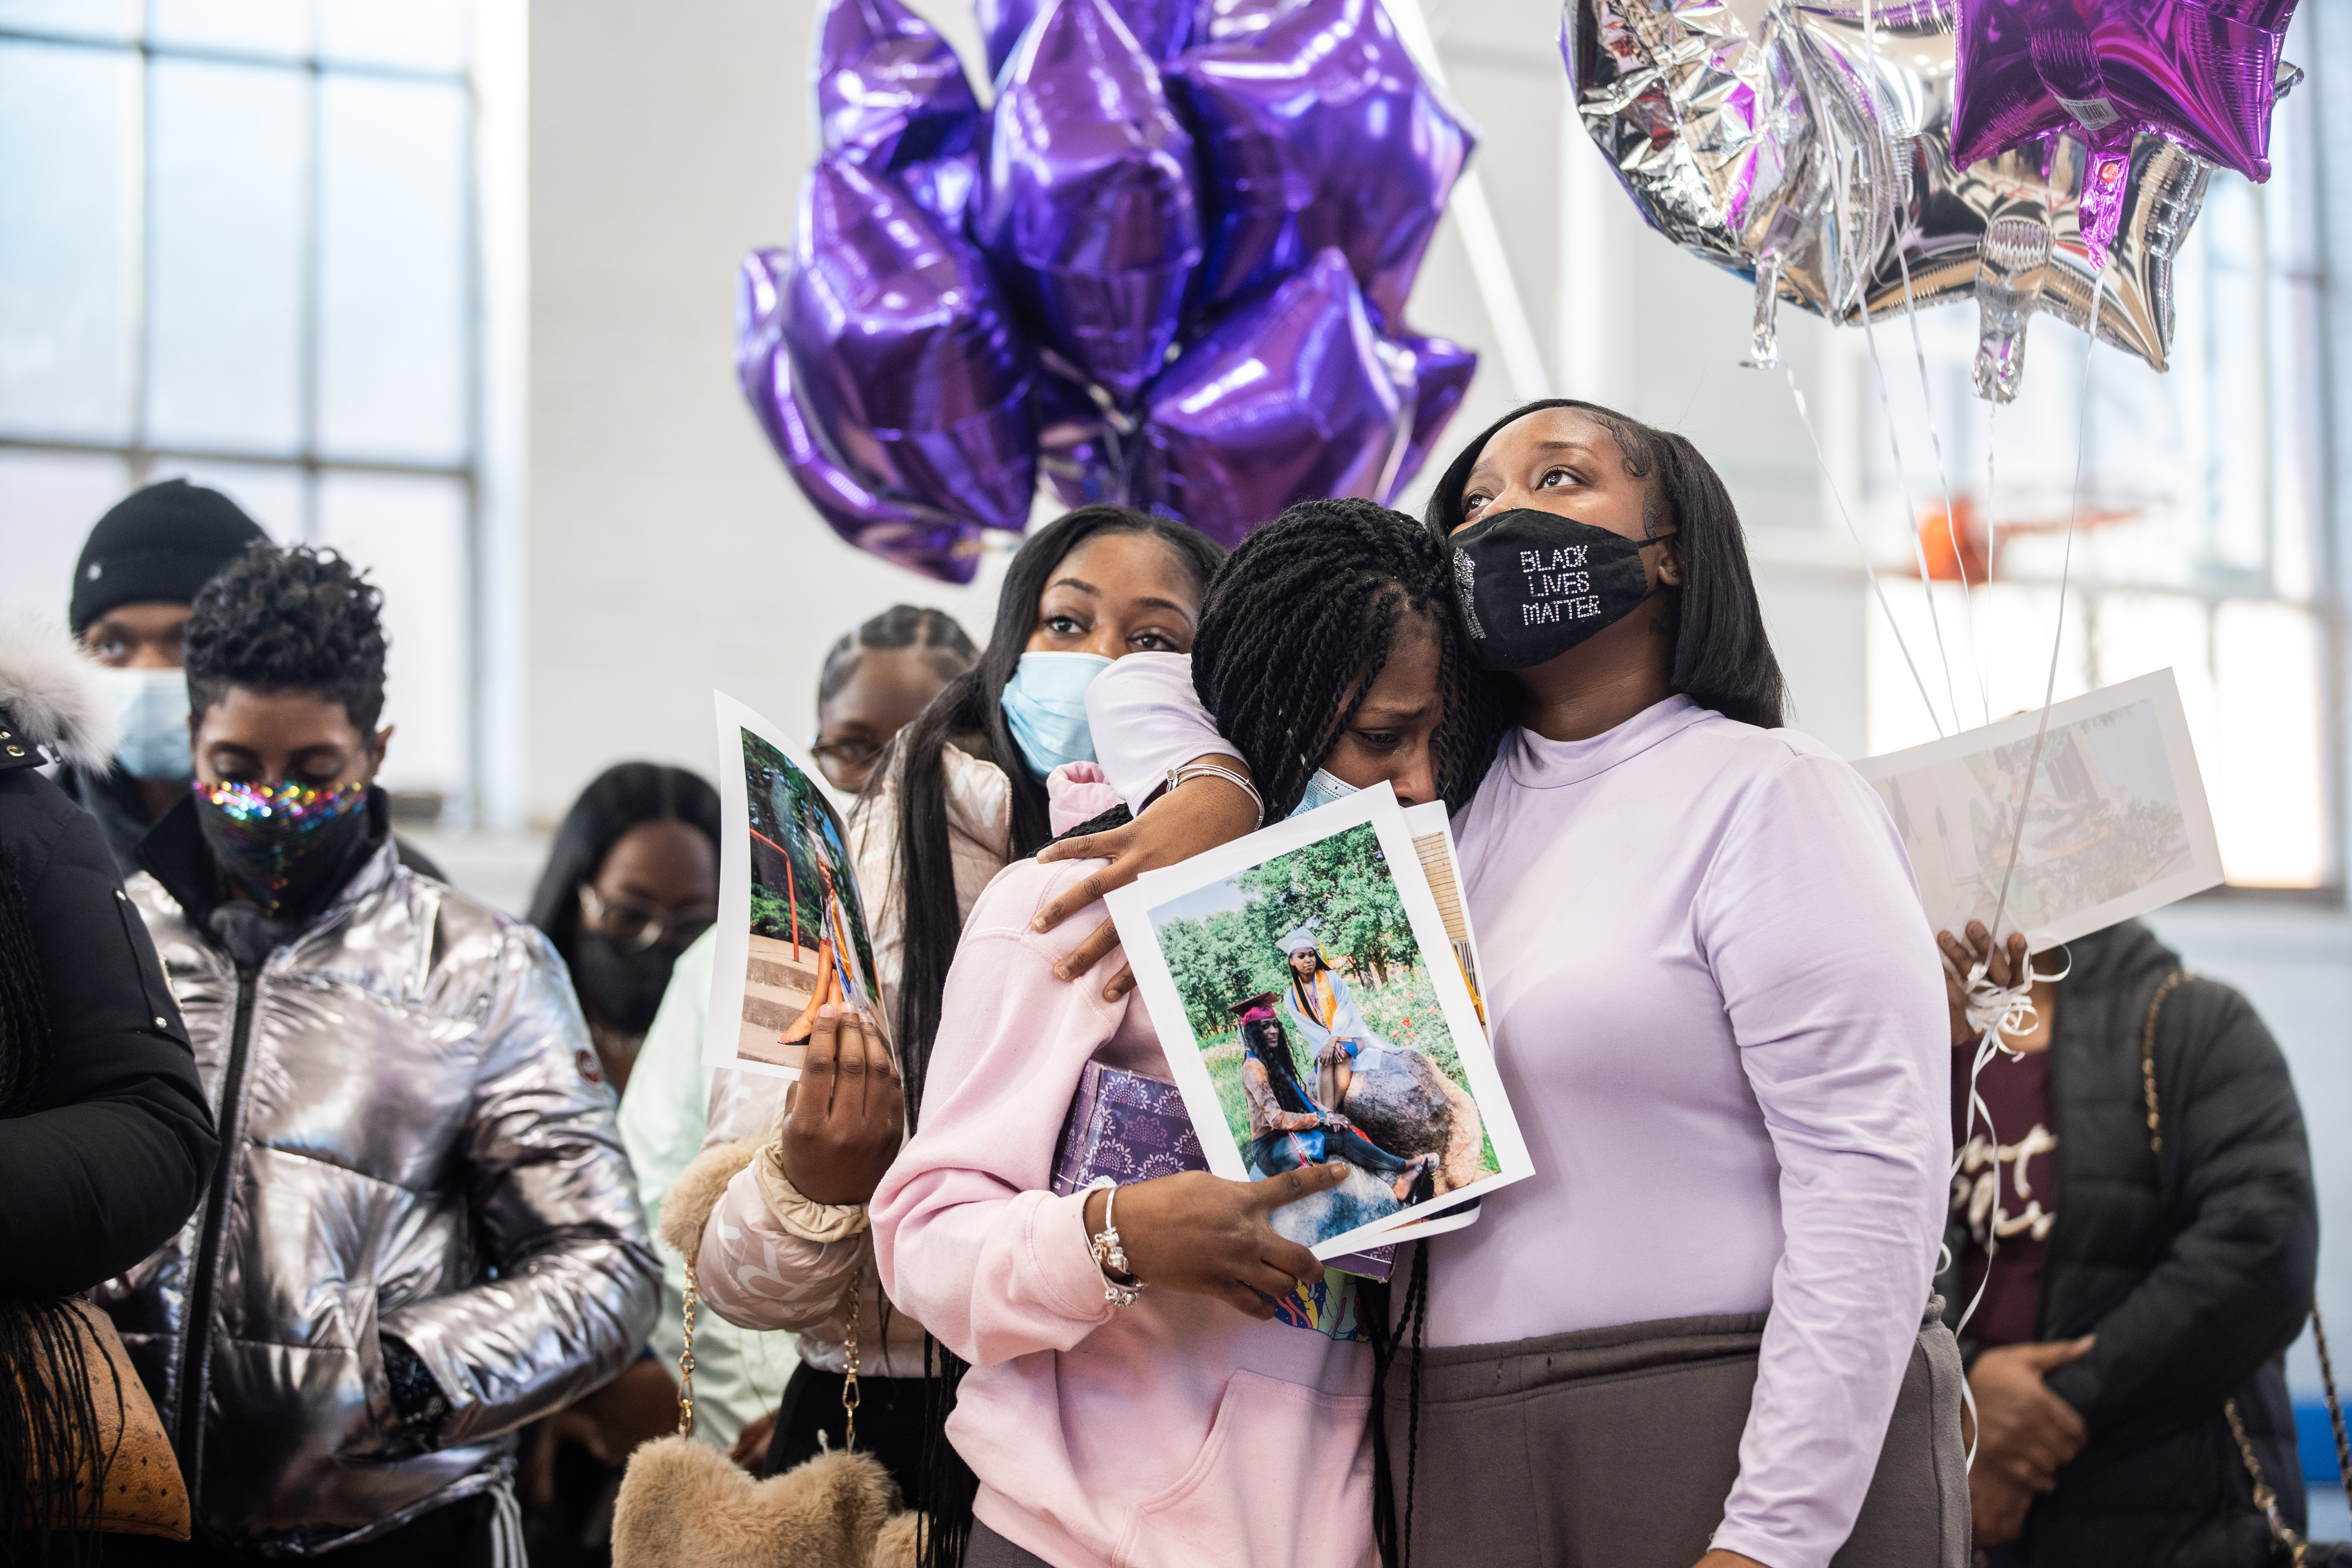 Teyonna Lofton, right, hugs Ambrosia Vasser, left, friends of activist LaNiyah Murphy, during a press conference at Ark of Saint Sabina in the Gresham neighborhood, where friends and family called for justice for Murphy, who was fatally shot in West Pullman on Jan. 4.